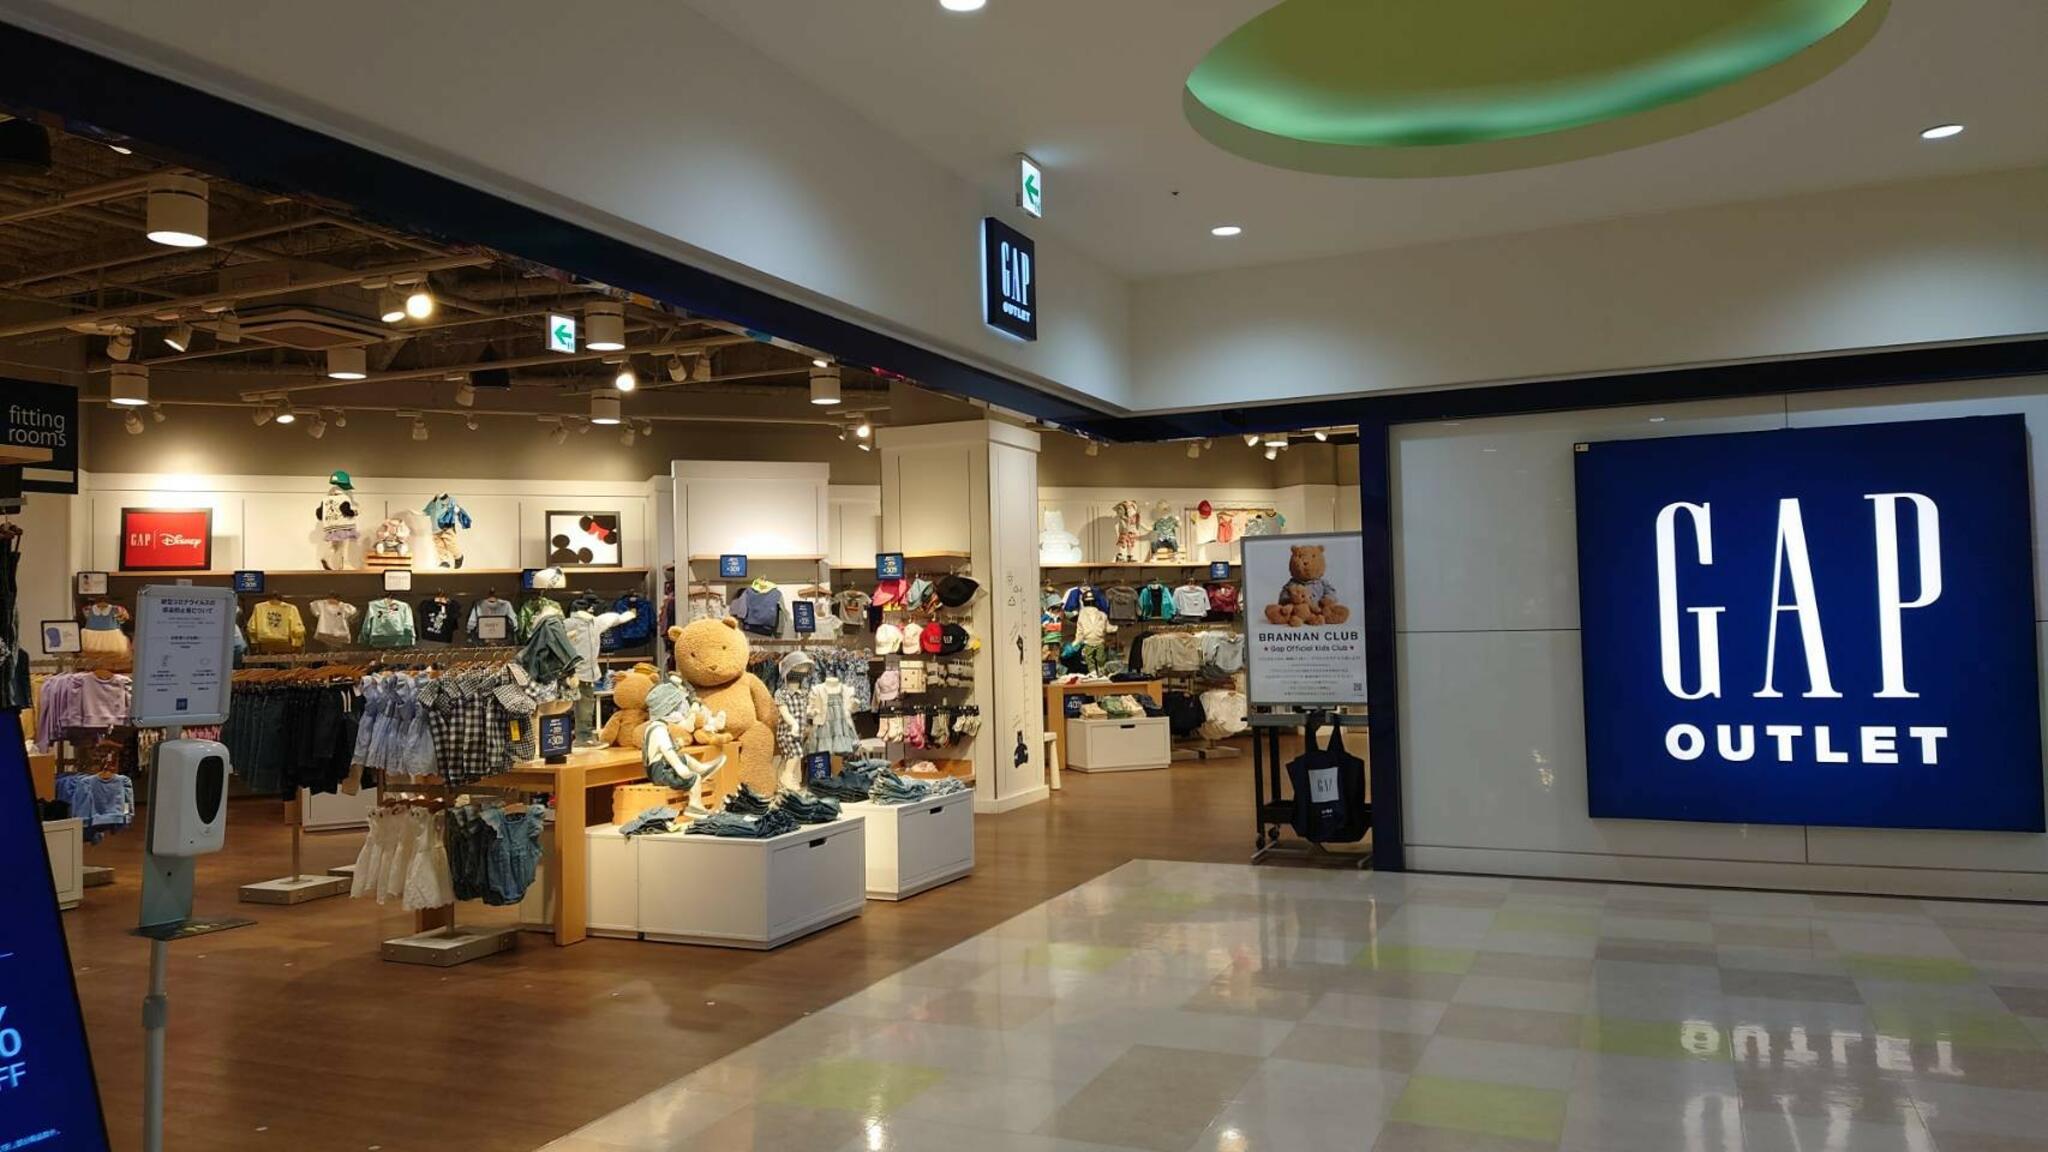 GAP Outlet 島忠ホームズ草加舎人店の代表写真1